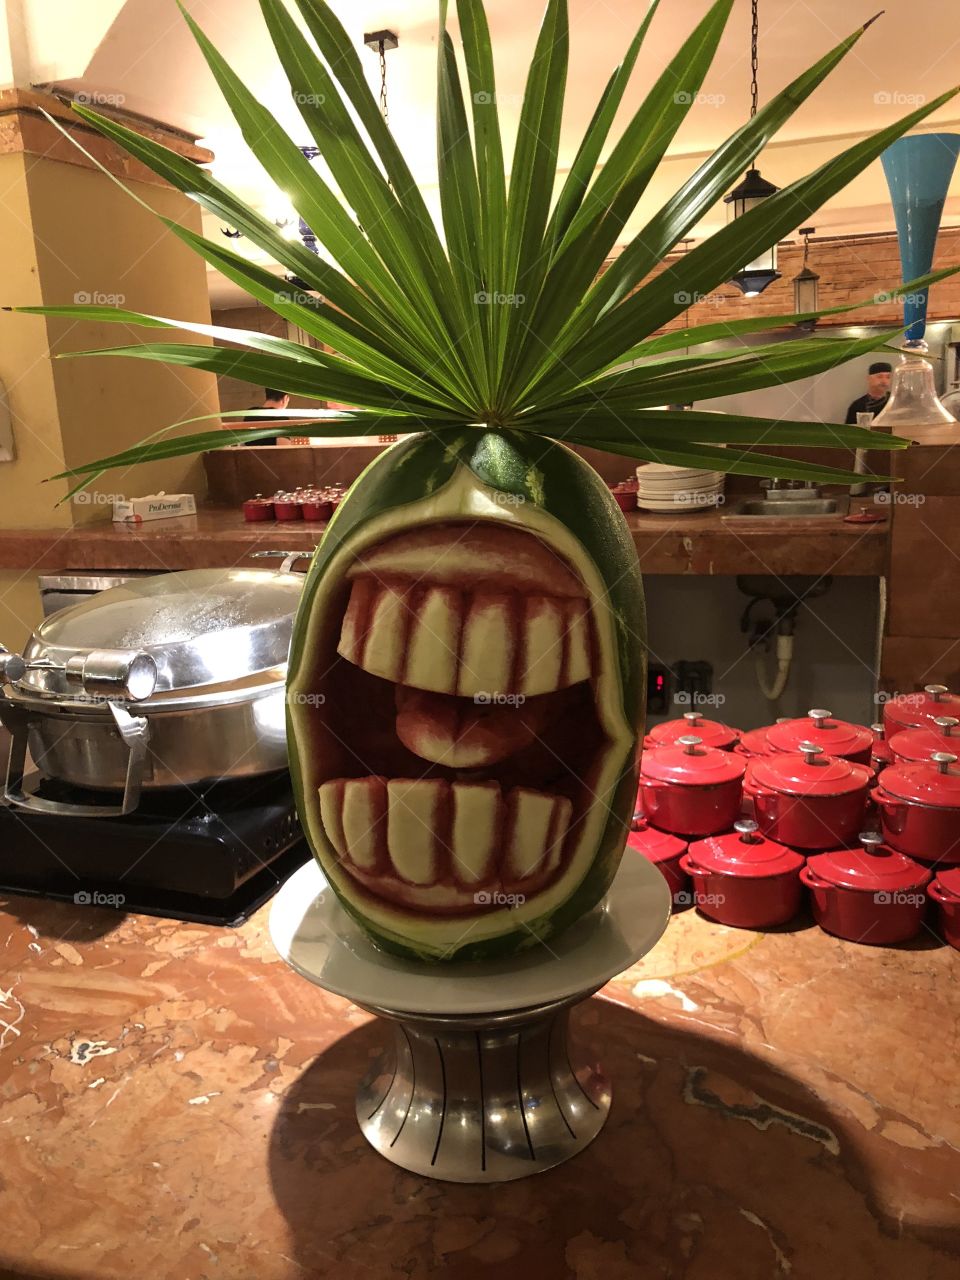 Watermelon carving